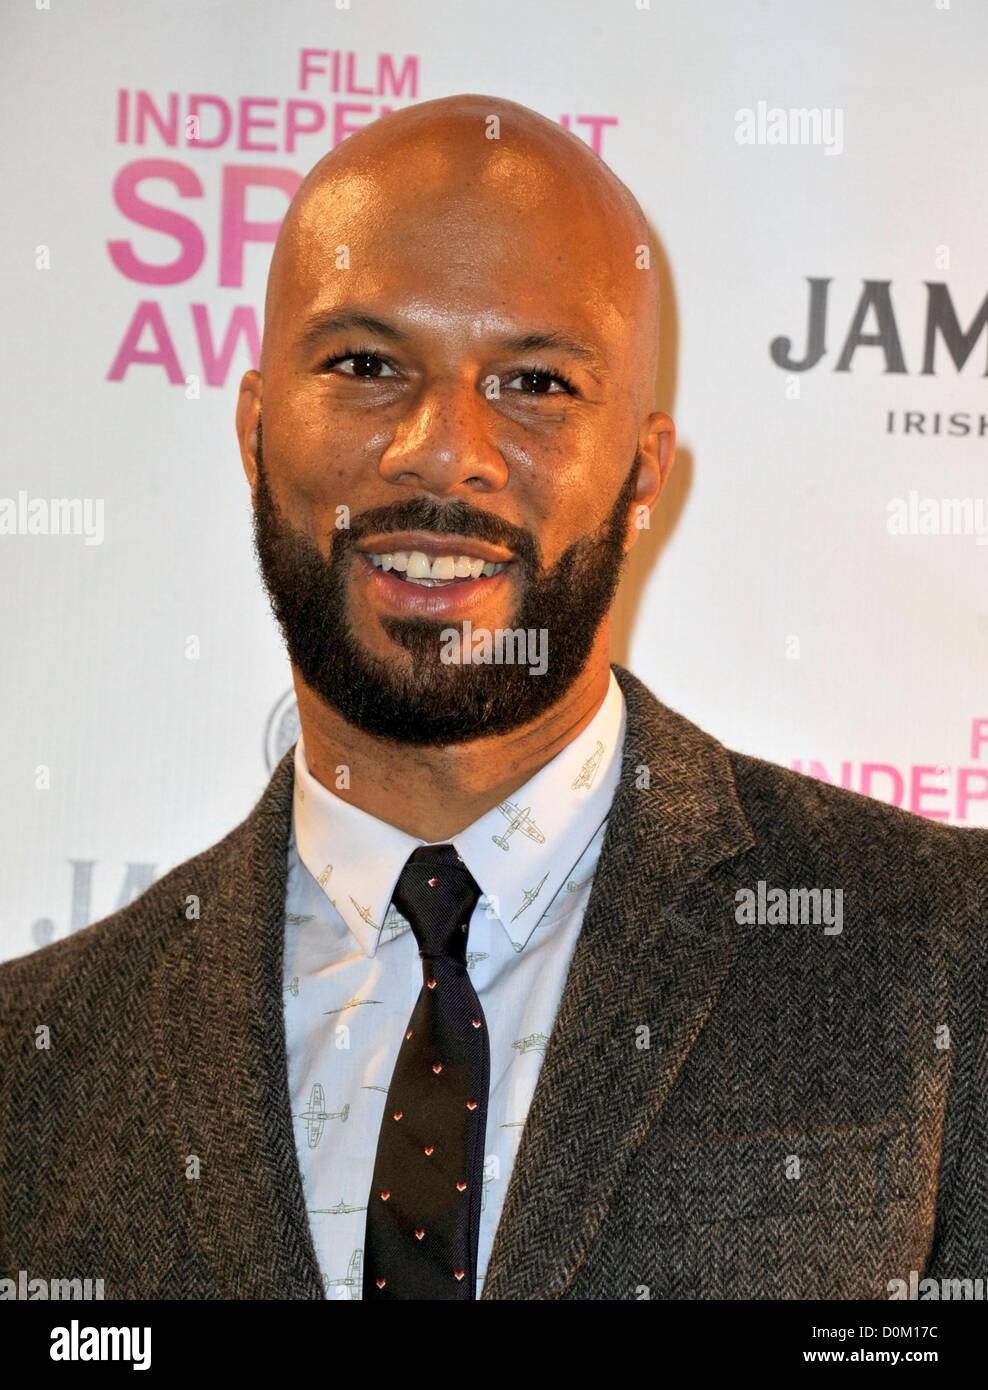 Los Angeles, USA. 27th November 2012. Lonnie Rashid Lynn Jr. 'Common' at the press conference for 2013 Film Independent Spirit Award Nominations Announcement, The W Hotel Hollywood, Los Angeles, CA November 27, 2012. Photo By: Dee Cercone/Everett Collection Stock Photo